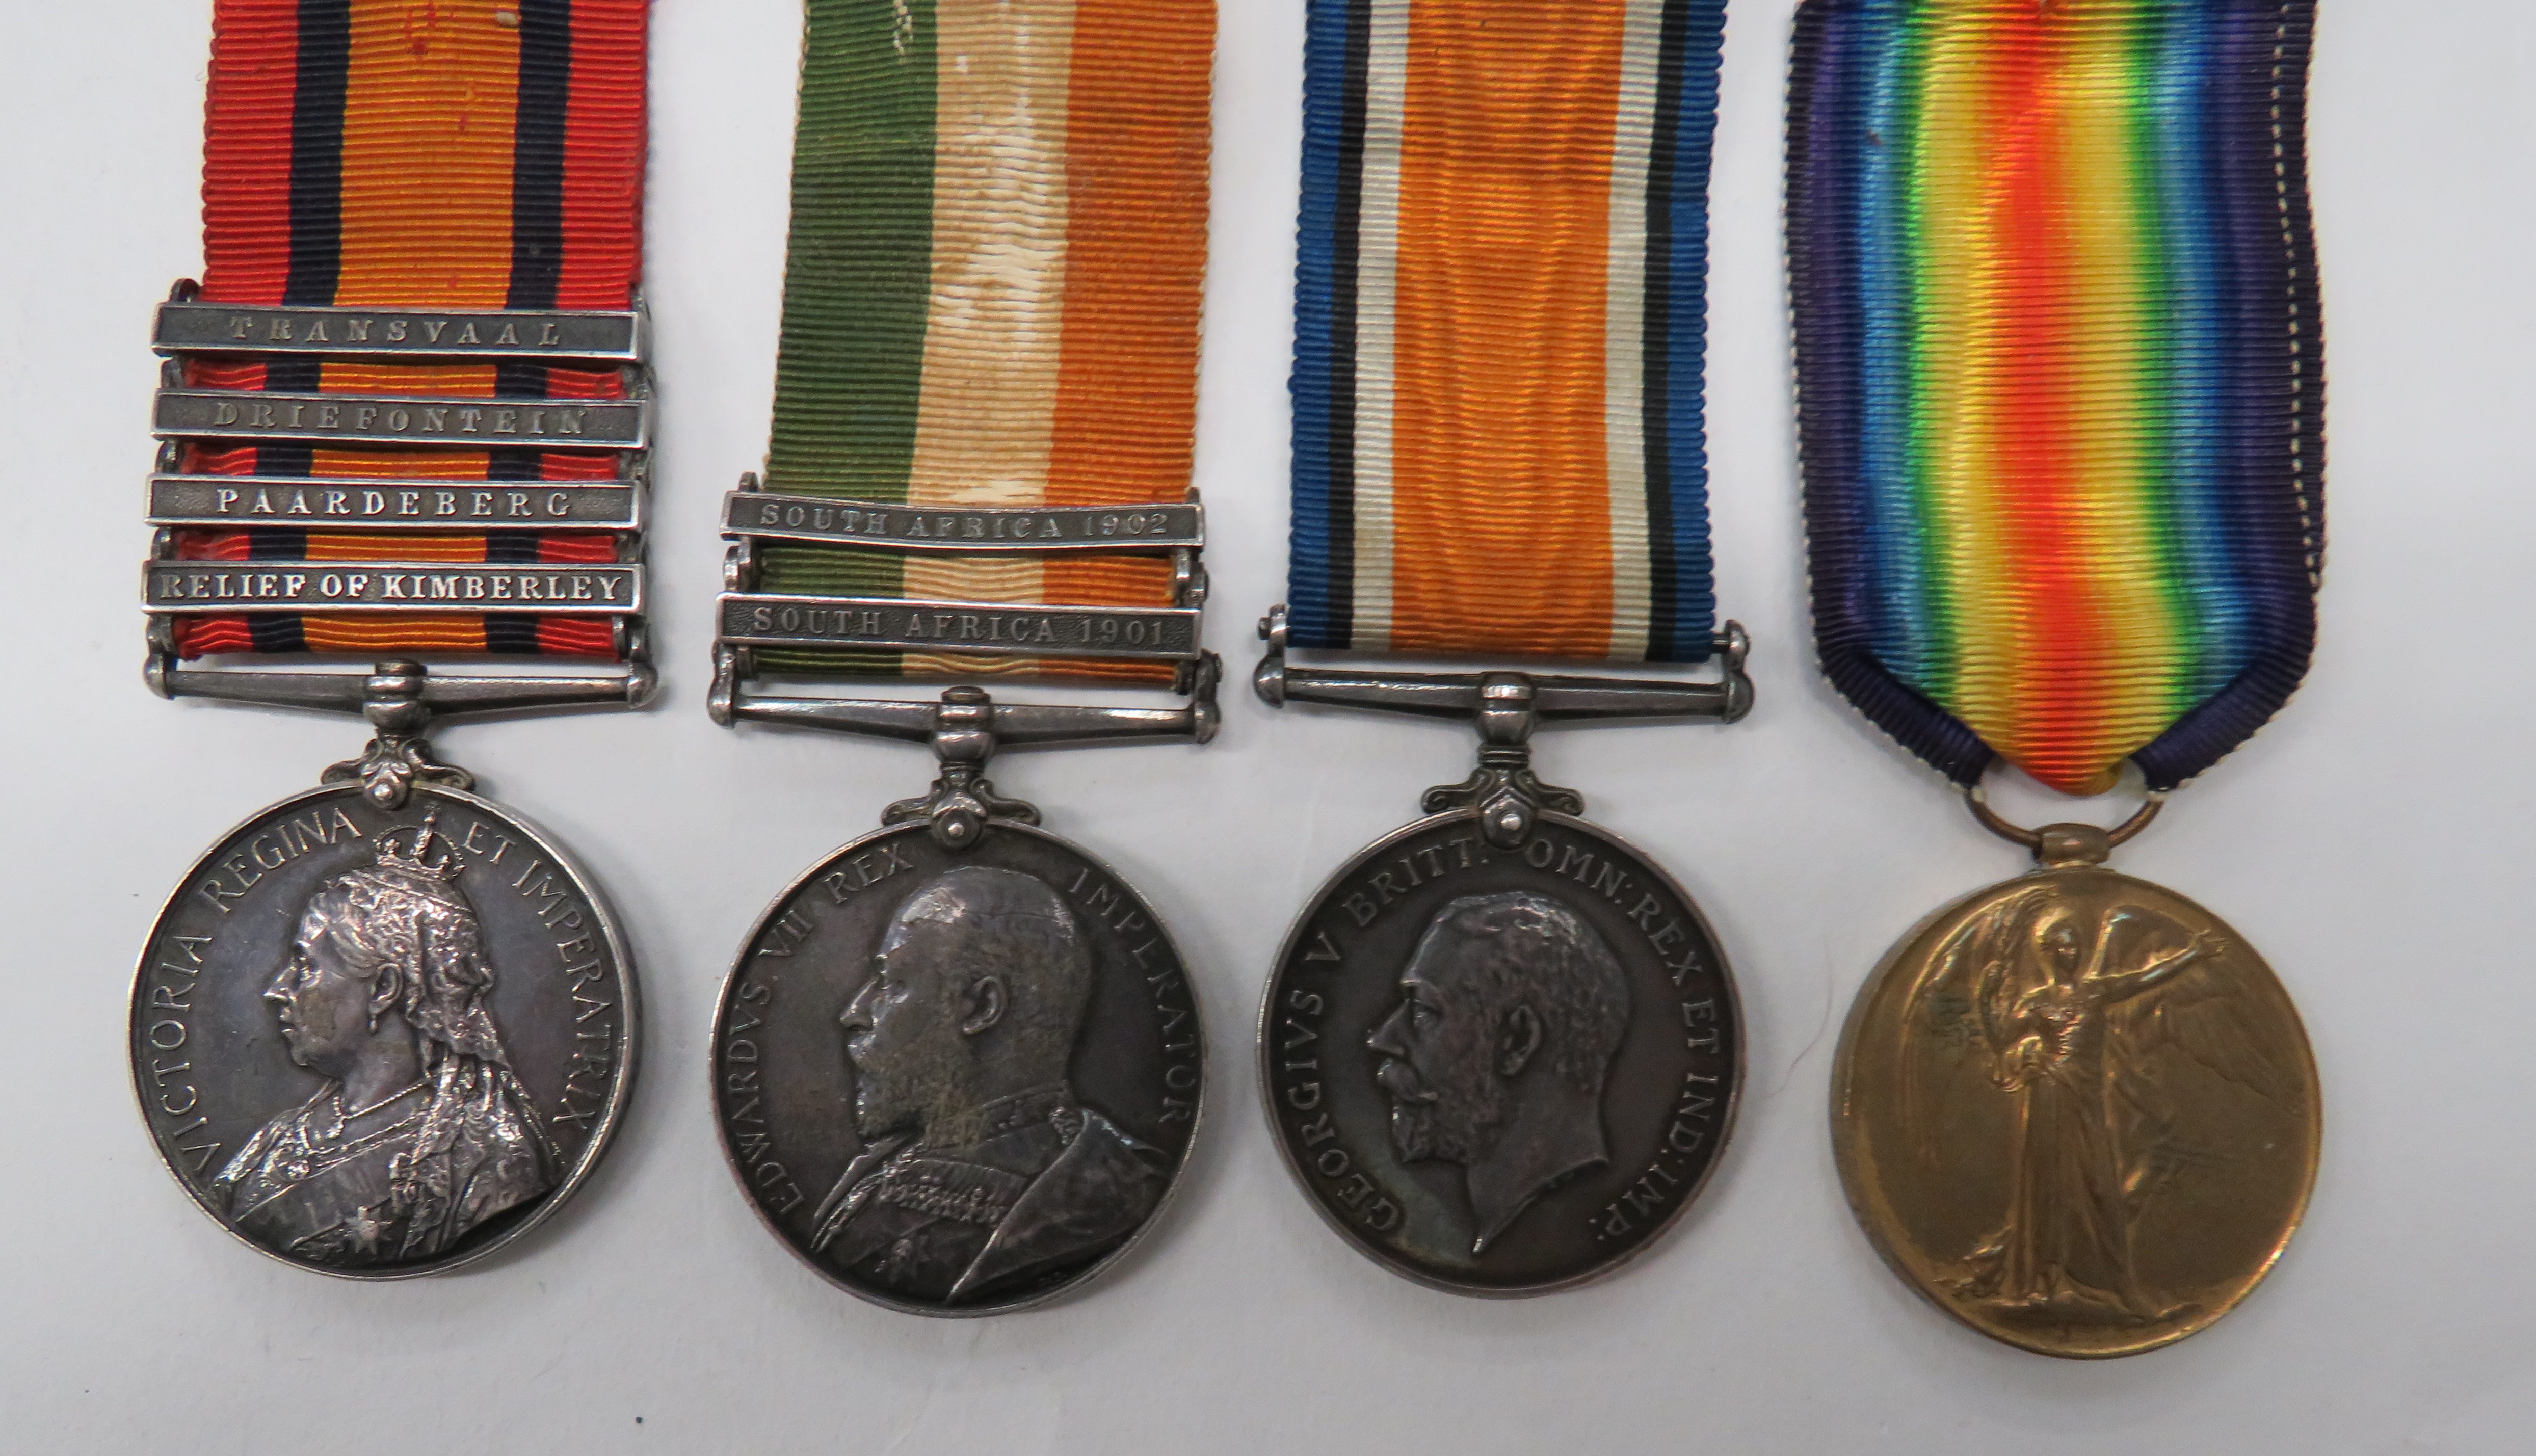 Boer War / WW1 6th Dragoon Guards / ASC Group of Four Medals. Awarded to Corporal Hugh Robertson